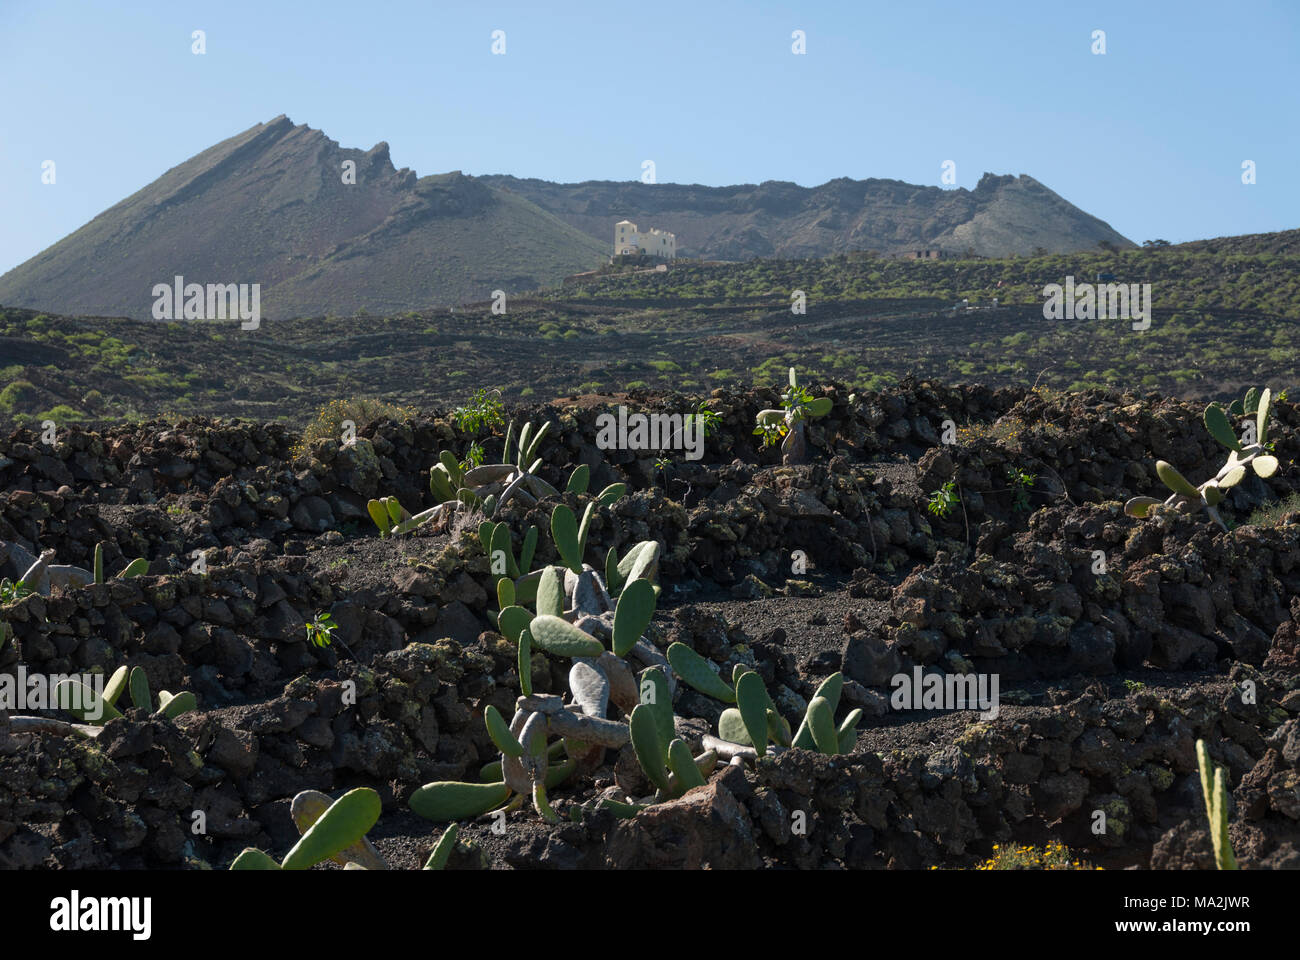 Volcanic landscape with a white house in the background at Lanzarote Stock Photo